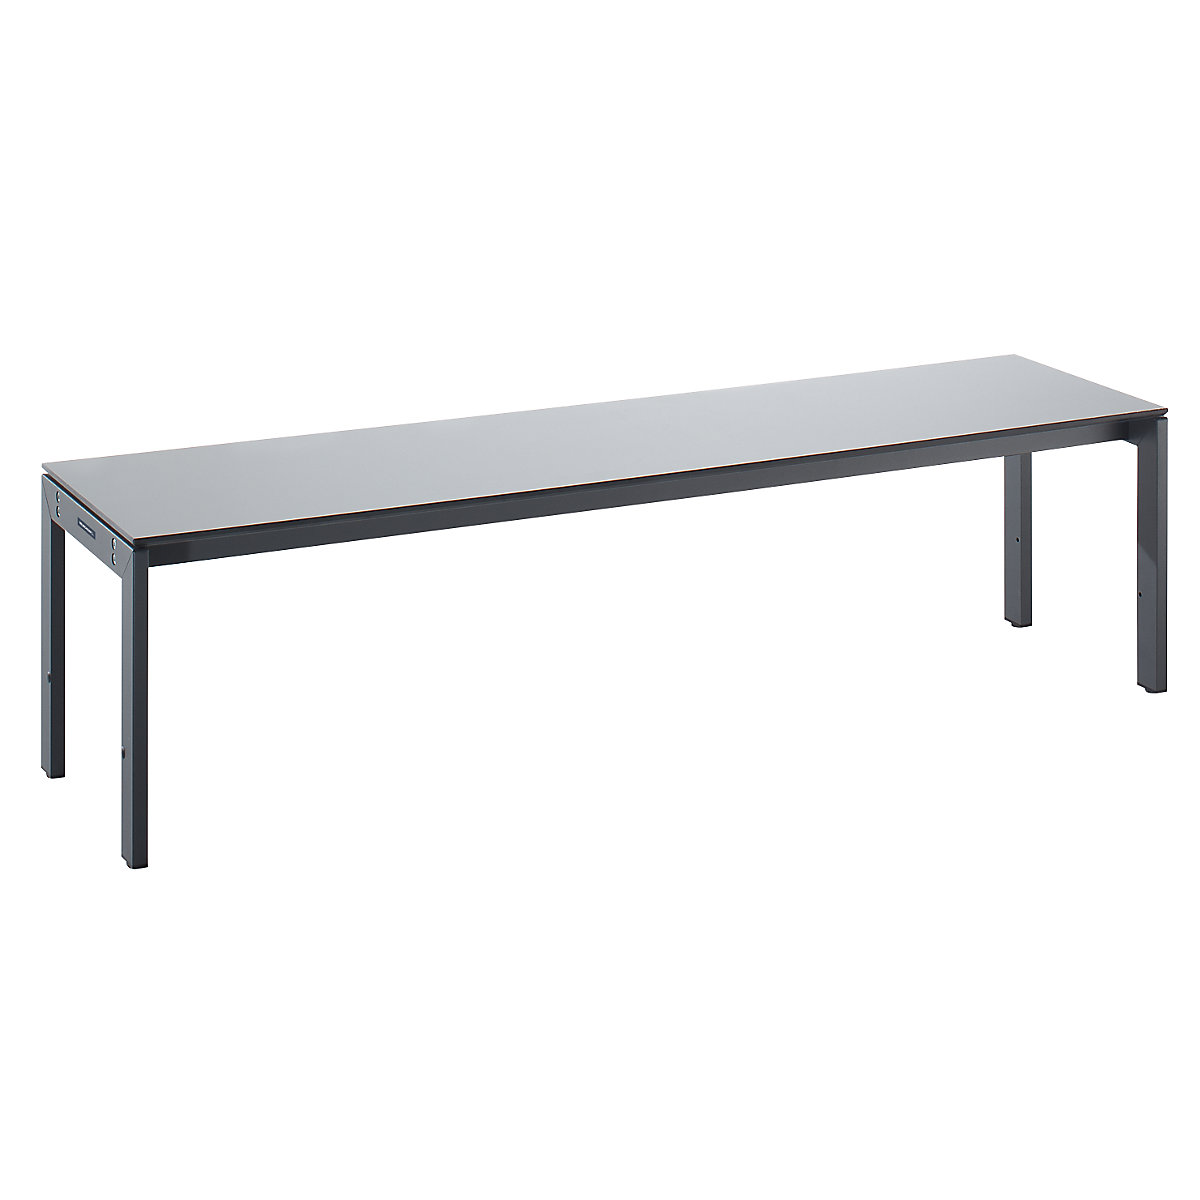 Changing room bench with steel frame – eurokraft pro